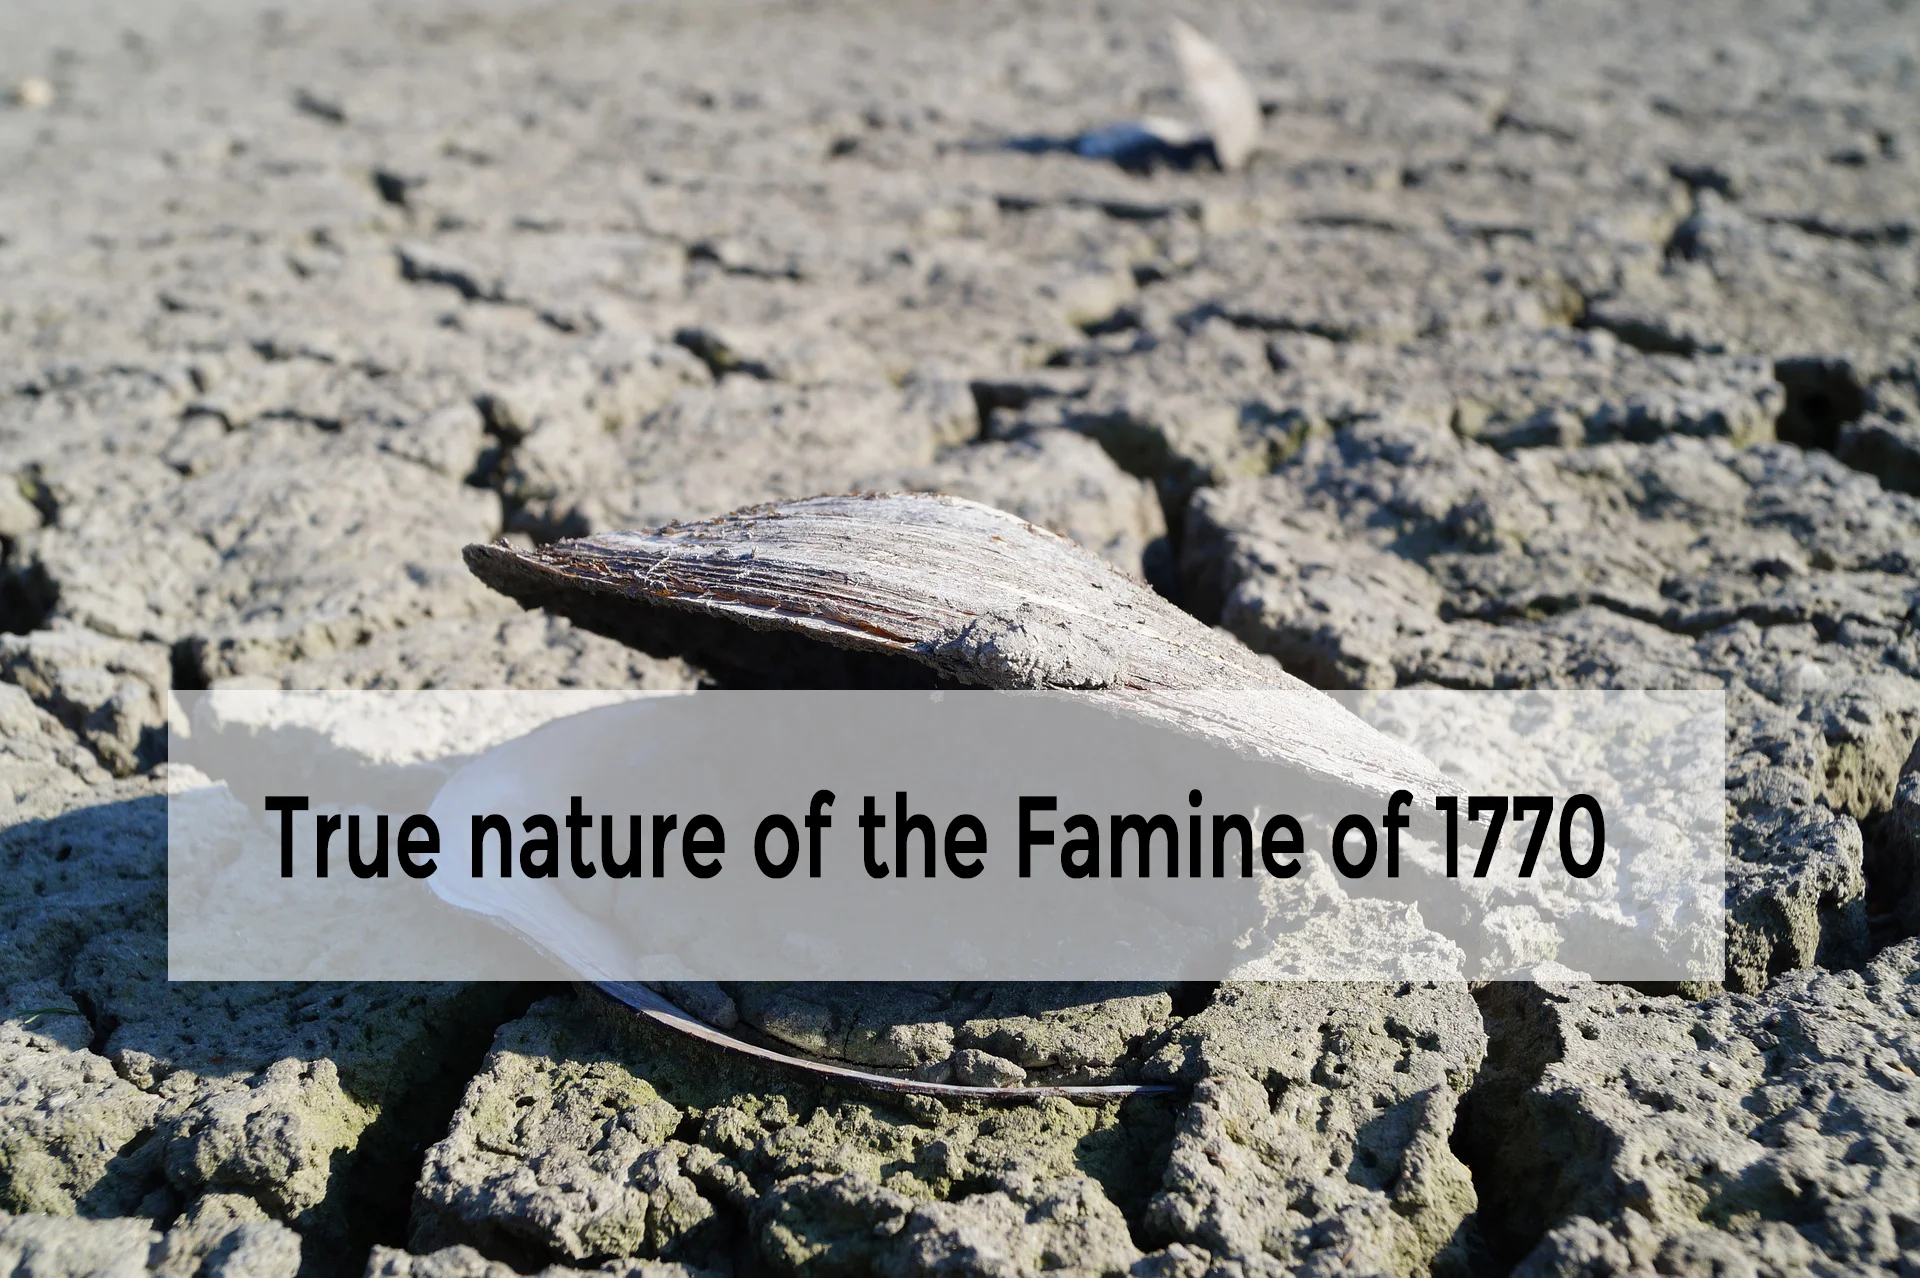 True nature of the Famine of 1770